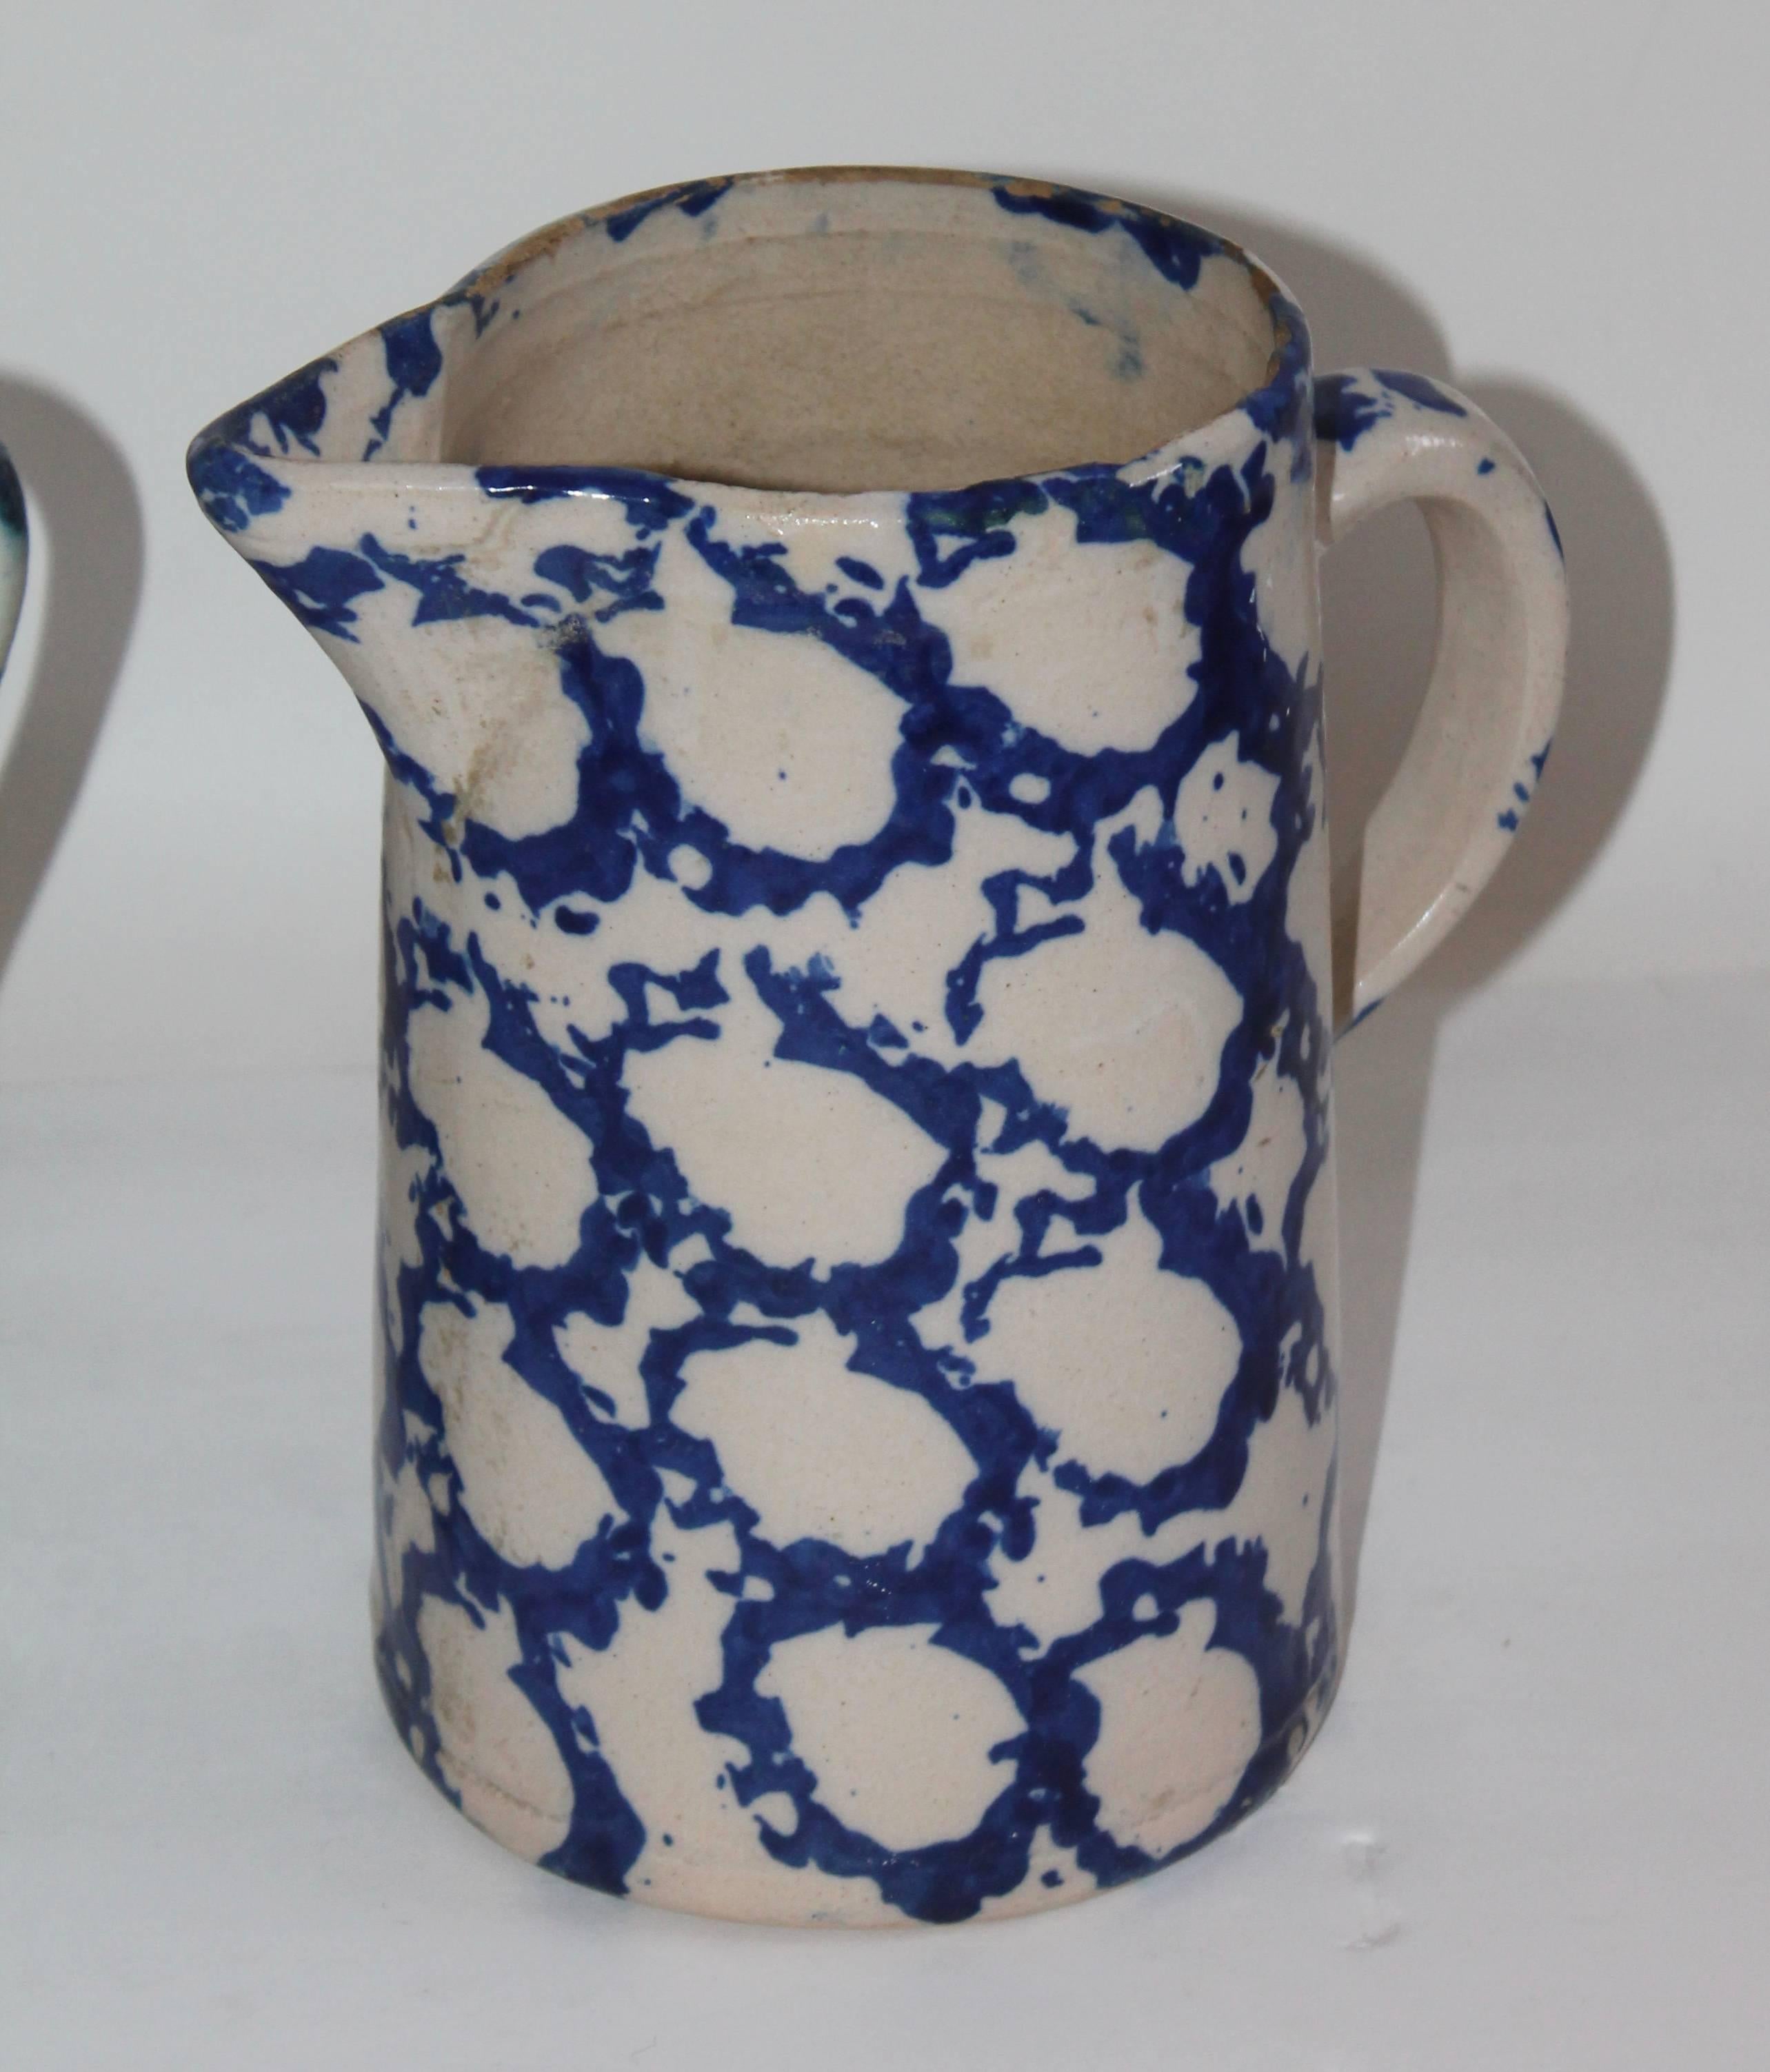 These tall patterned spongeware pitchers are in good condition with minor wear on the one pitcher to left its spout has warn down on the top. It does not detract from it's beauty. Sold as a group.